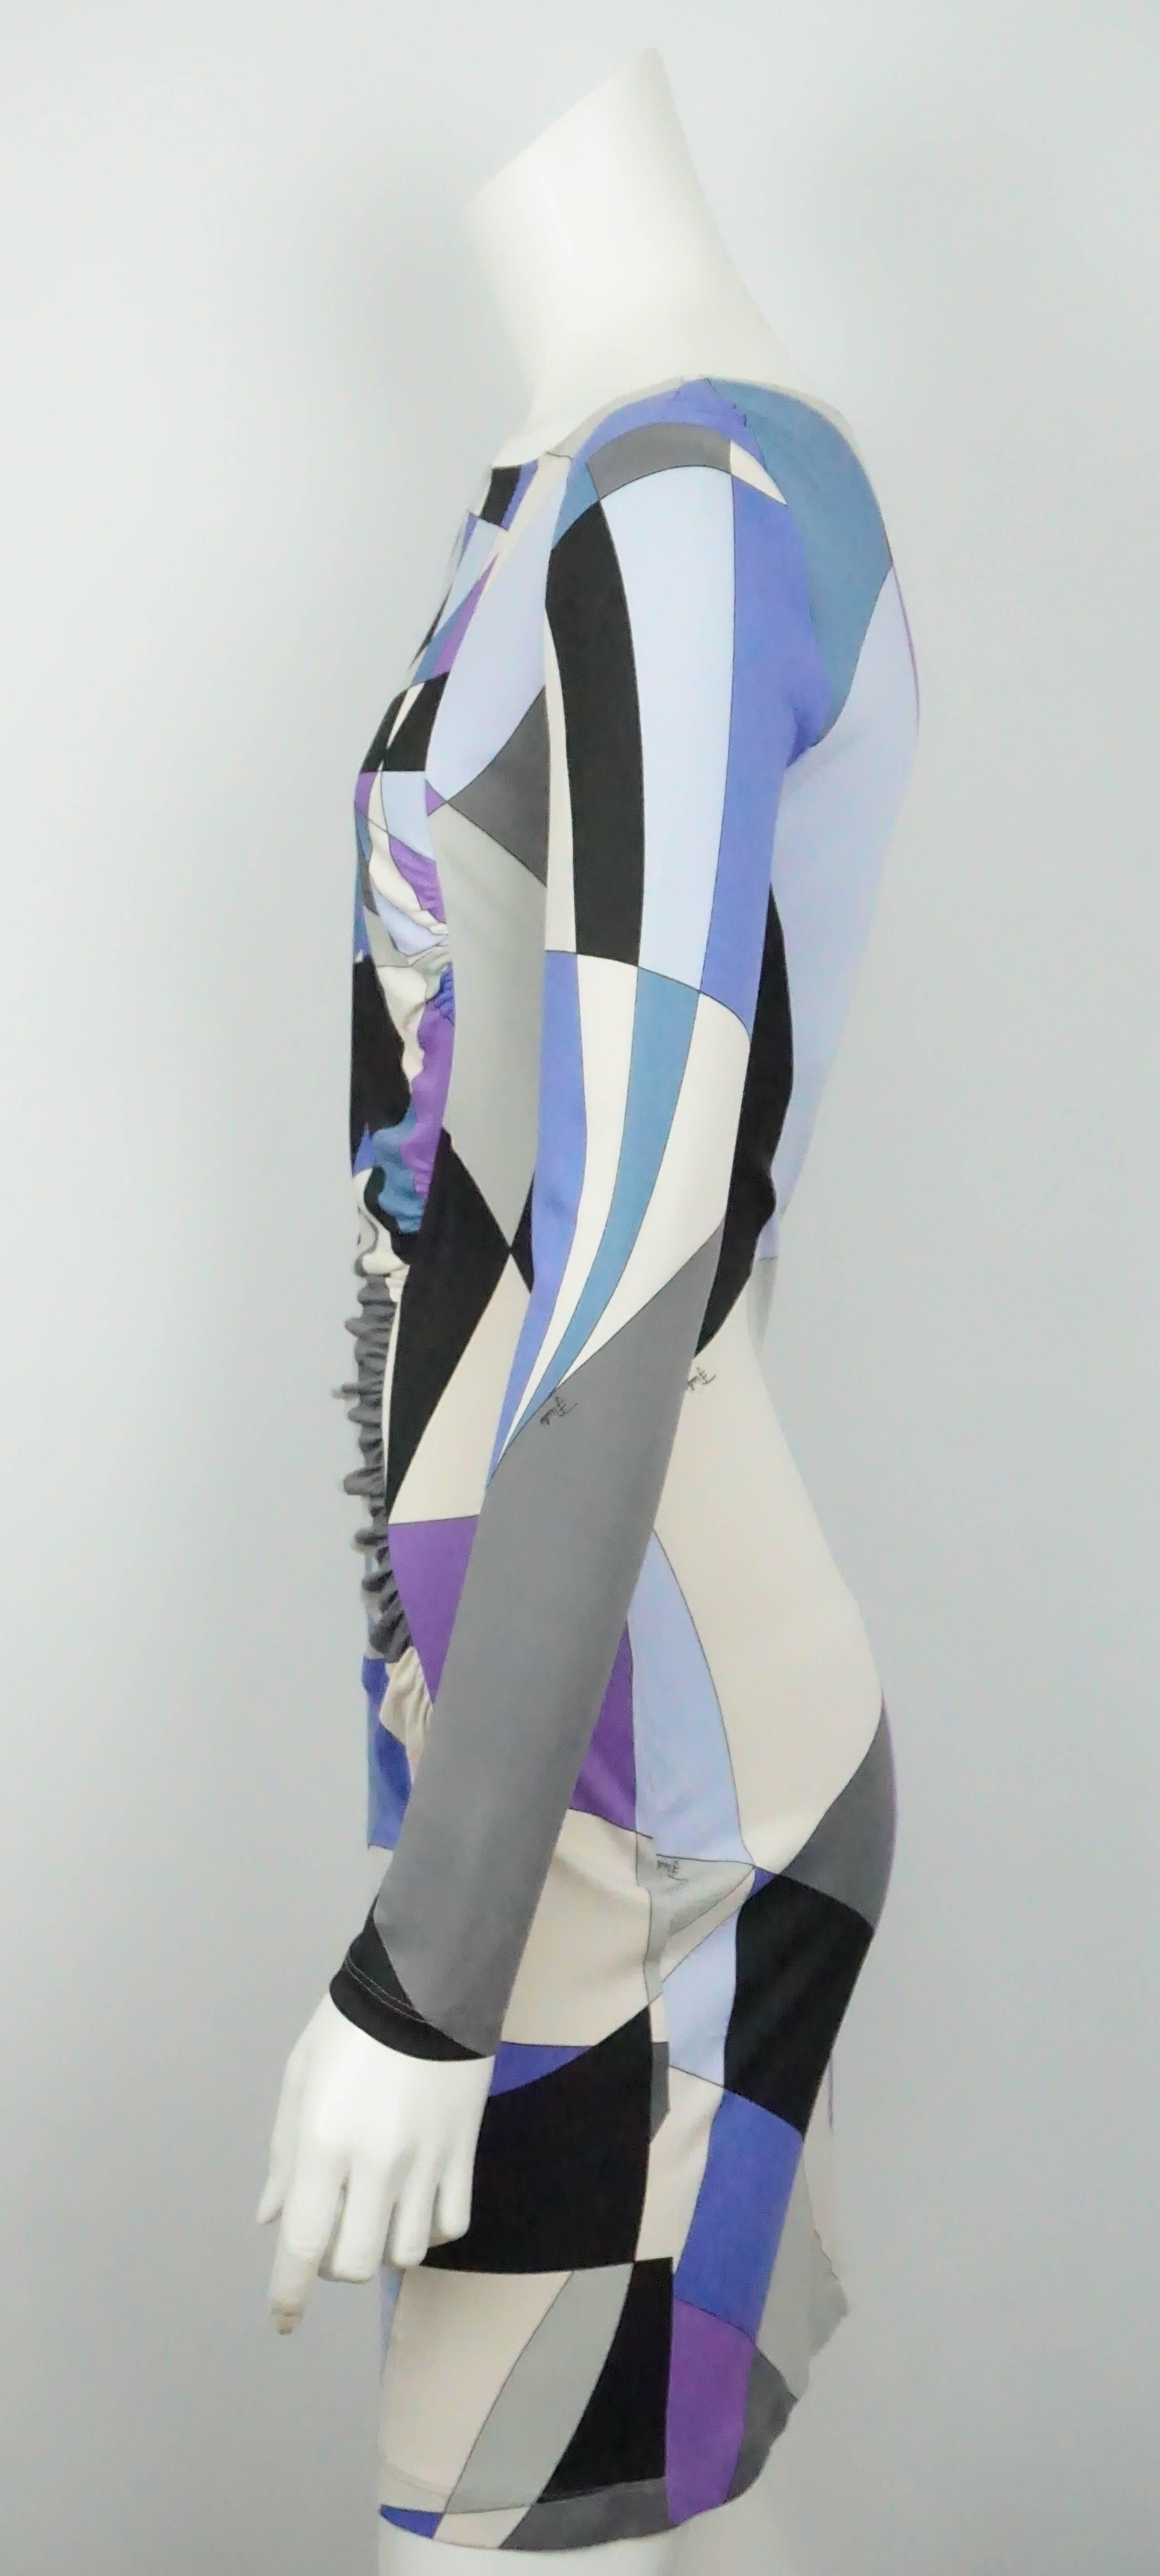 Emilio Pucci Blue Printed LS Dress - 10  This beautiful viscose dress is in excellent condition. The dress has a round neckline and is long sleeved. It also has an interesting ruching detail in the front of the dress. It is lined but only on the